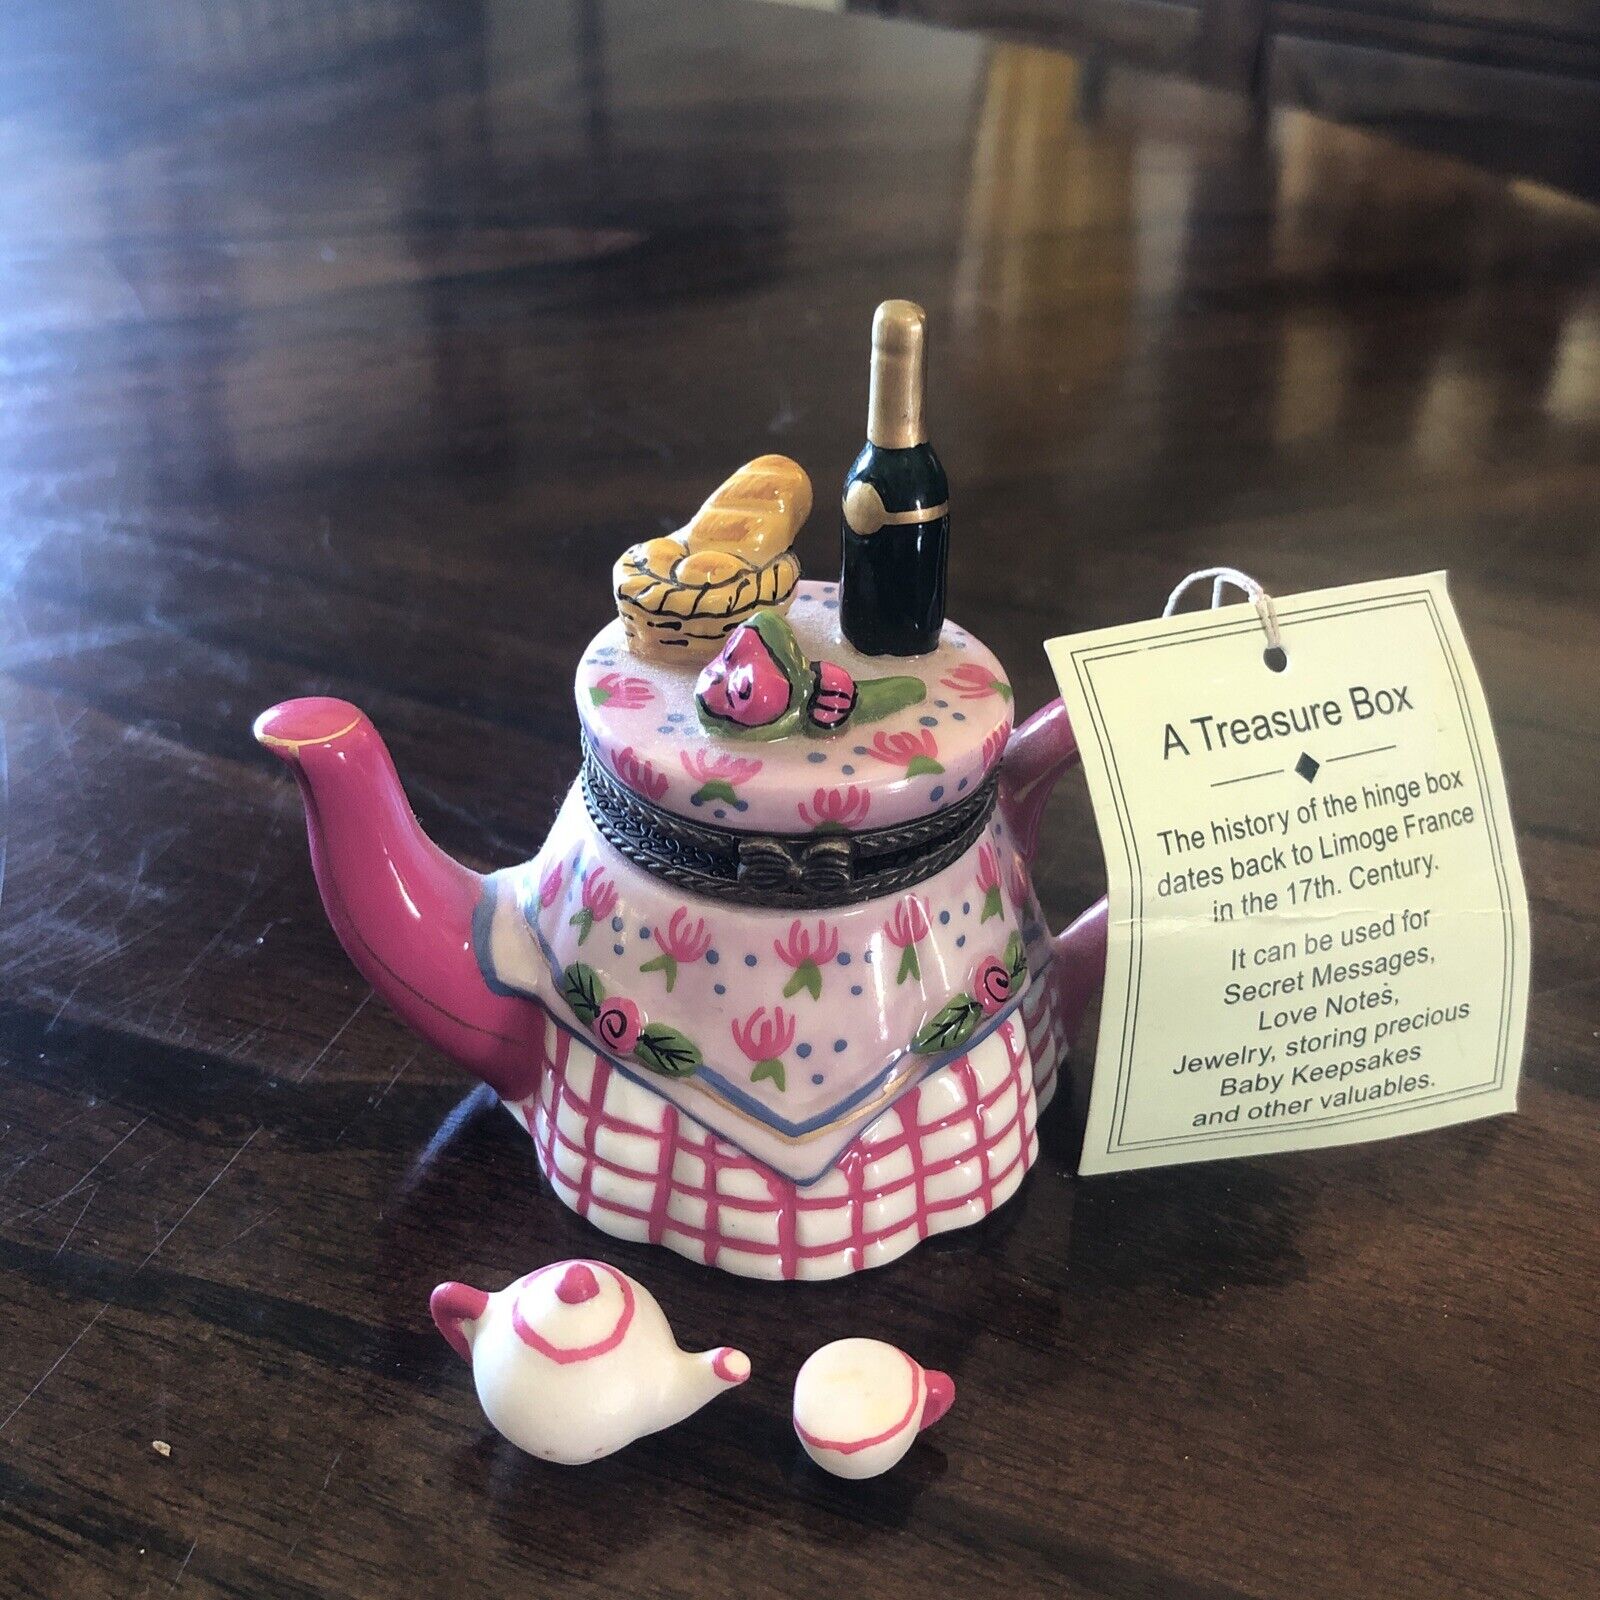 Direct Connection Trinket Box Pink Tea Pot with Mini Tea Pot and Cup Inside